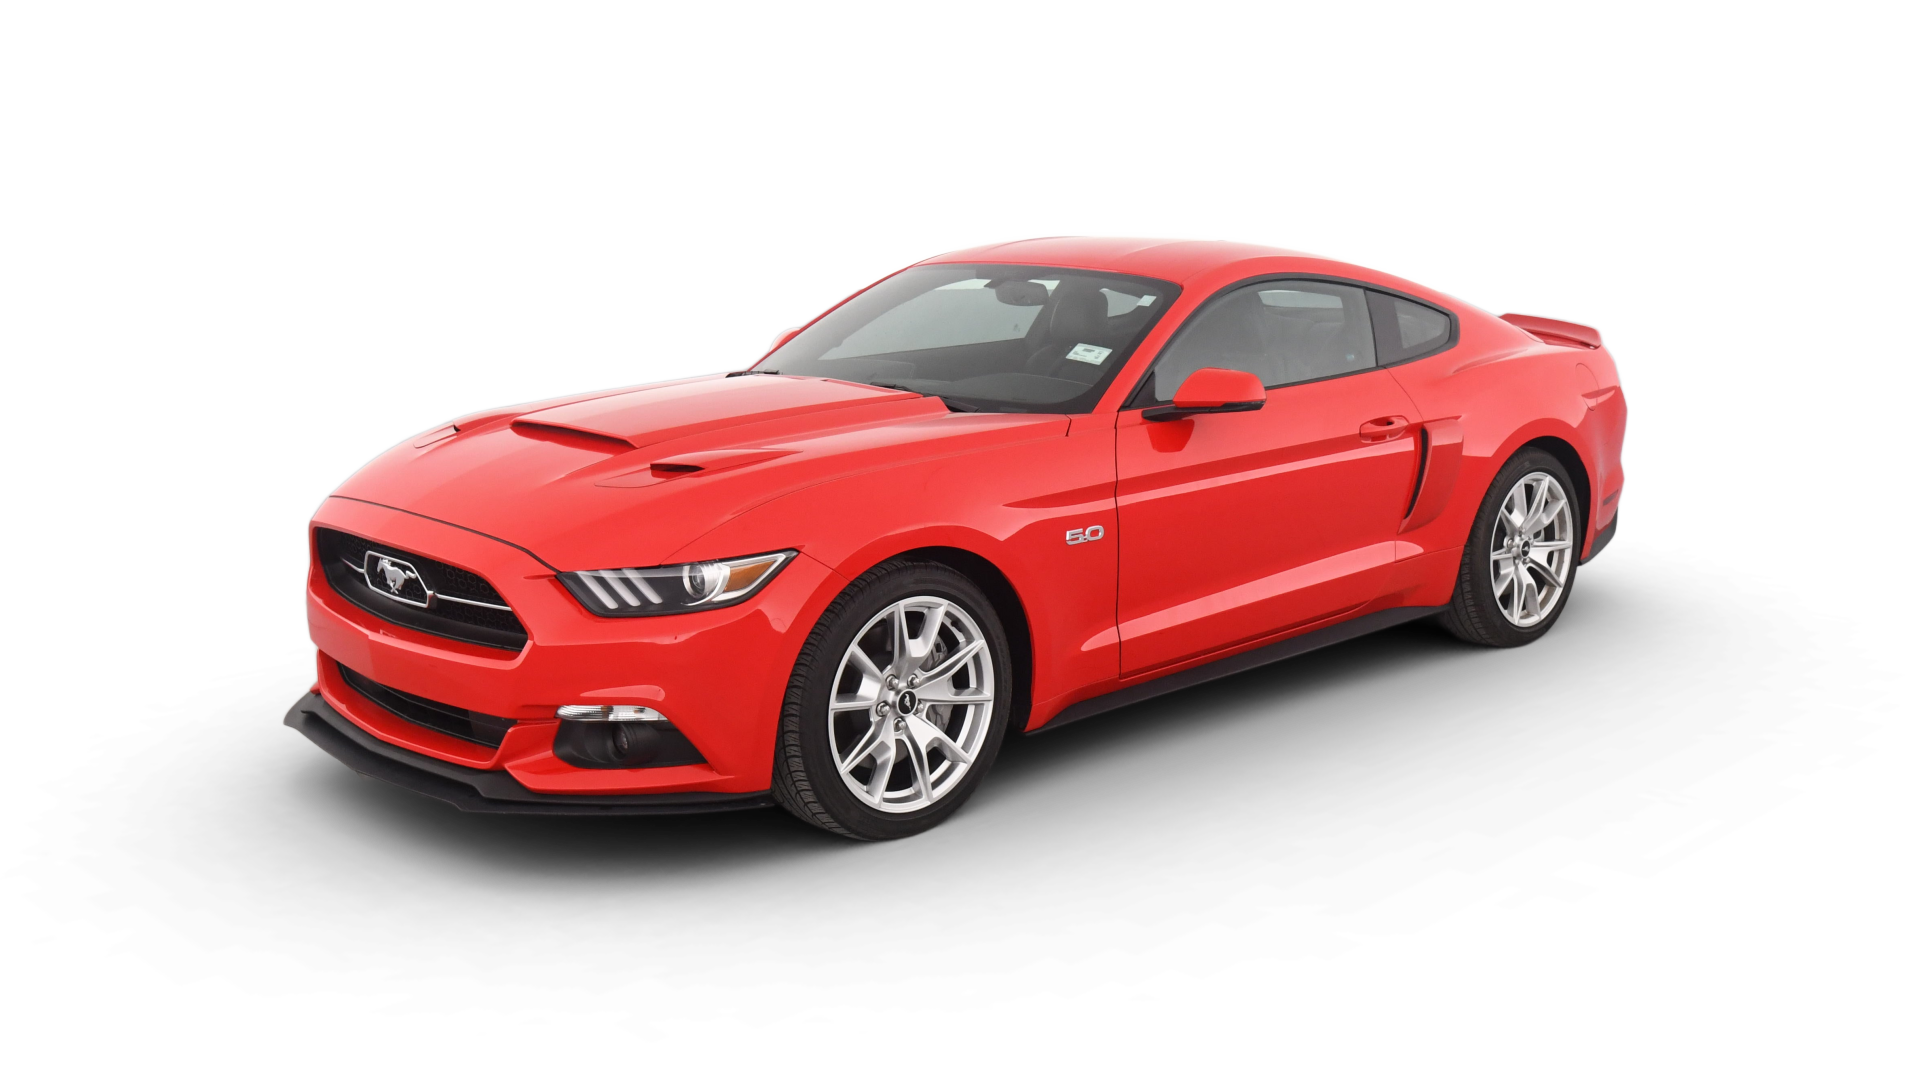 Used 2015 Ford Mustang For Sale Online | Carvana